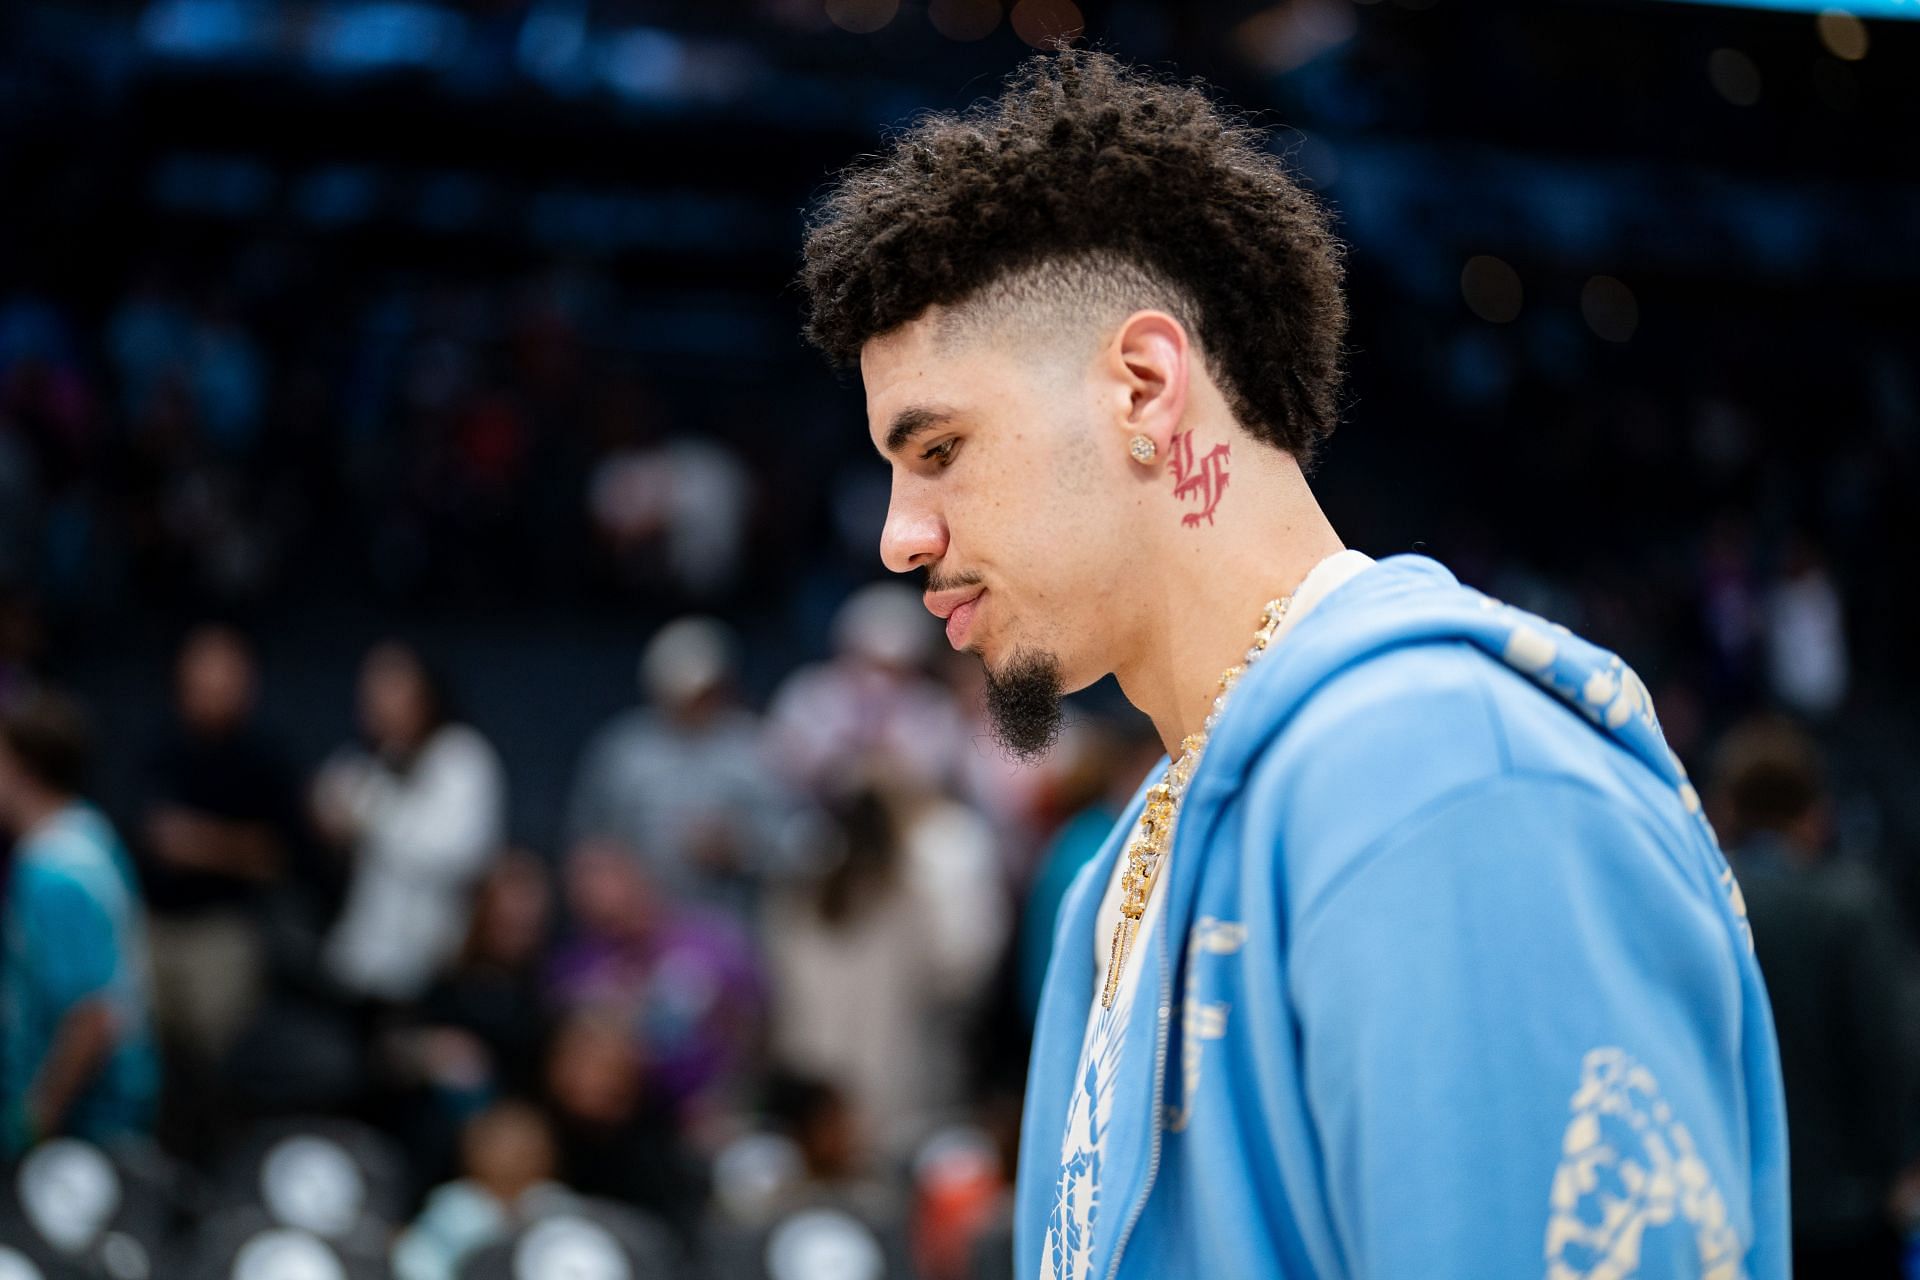 LaMelo Ball and Jack Gohlke could form one of the more unusual NBA backcourts if they played together with the Charlotte Hornets.